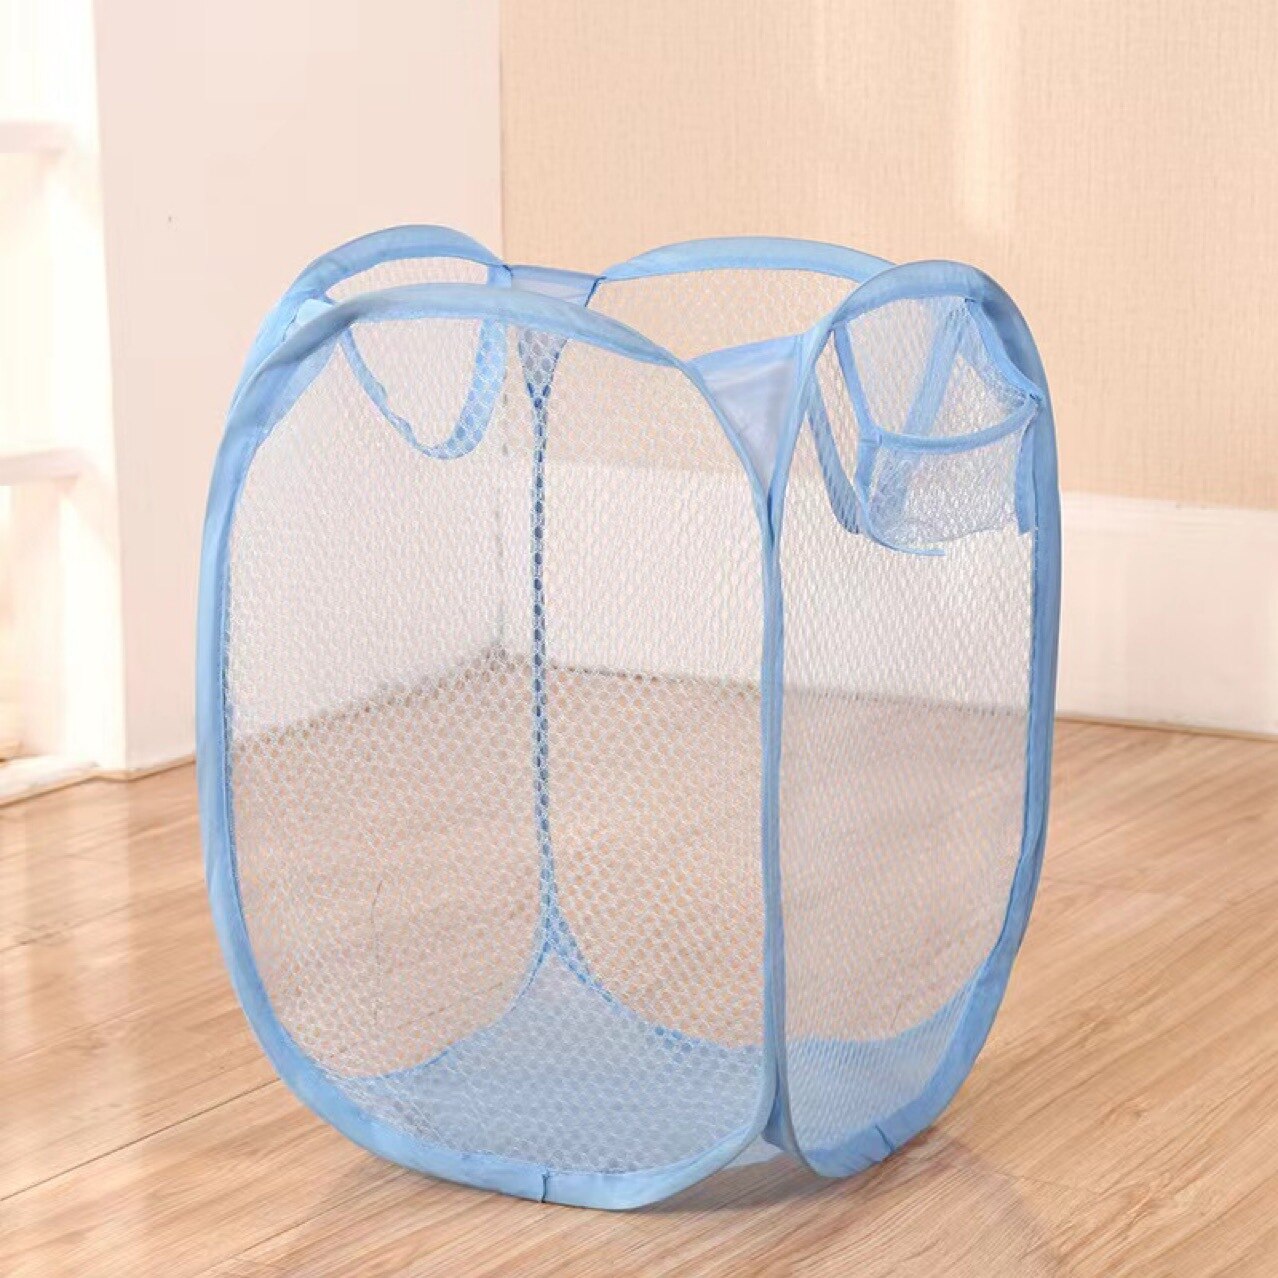 Mesh Pop Up Square Laundry Basket Storage Toy Organizer Bag Collapsible Clothes Baskets For Dorm